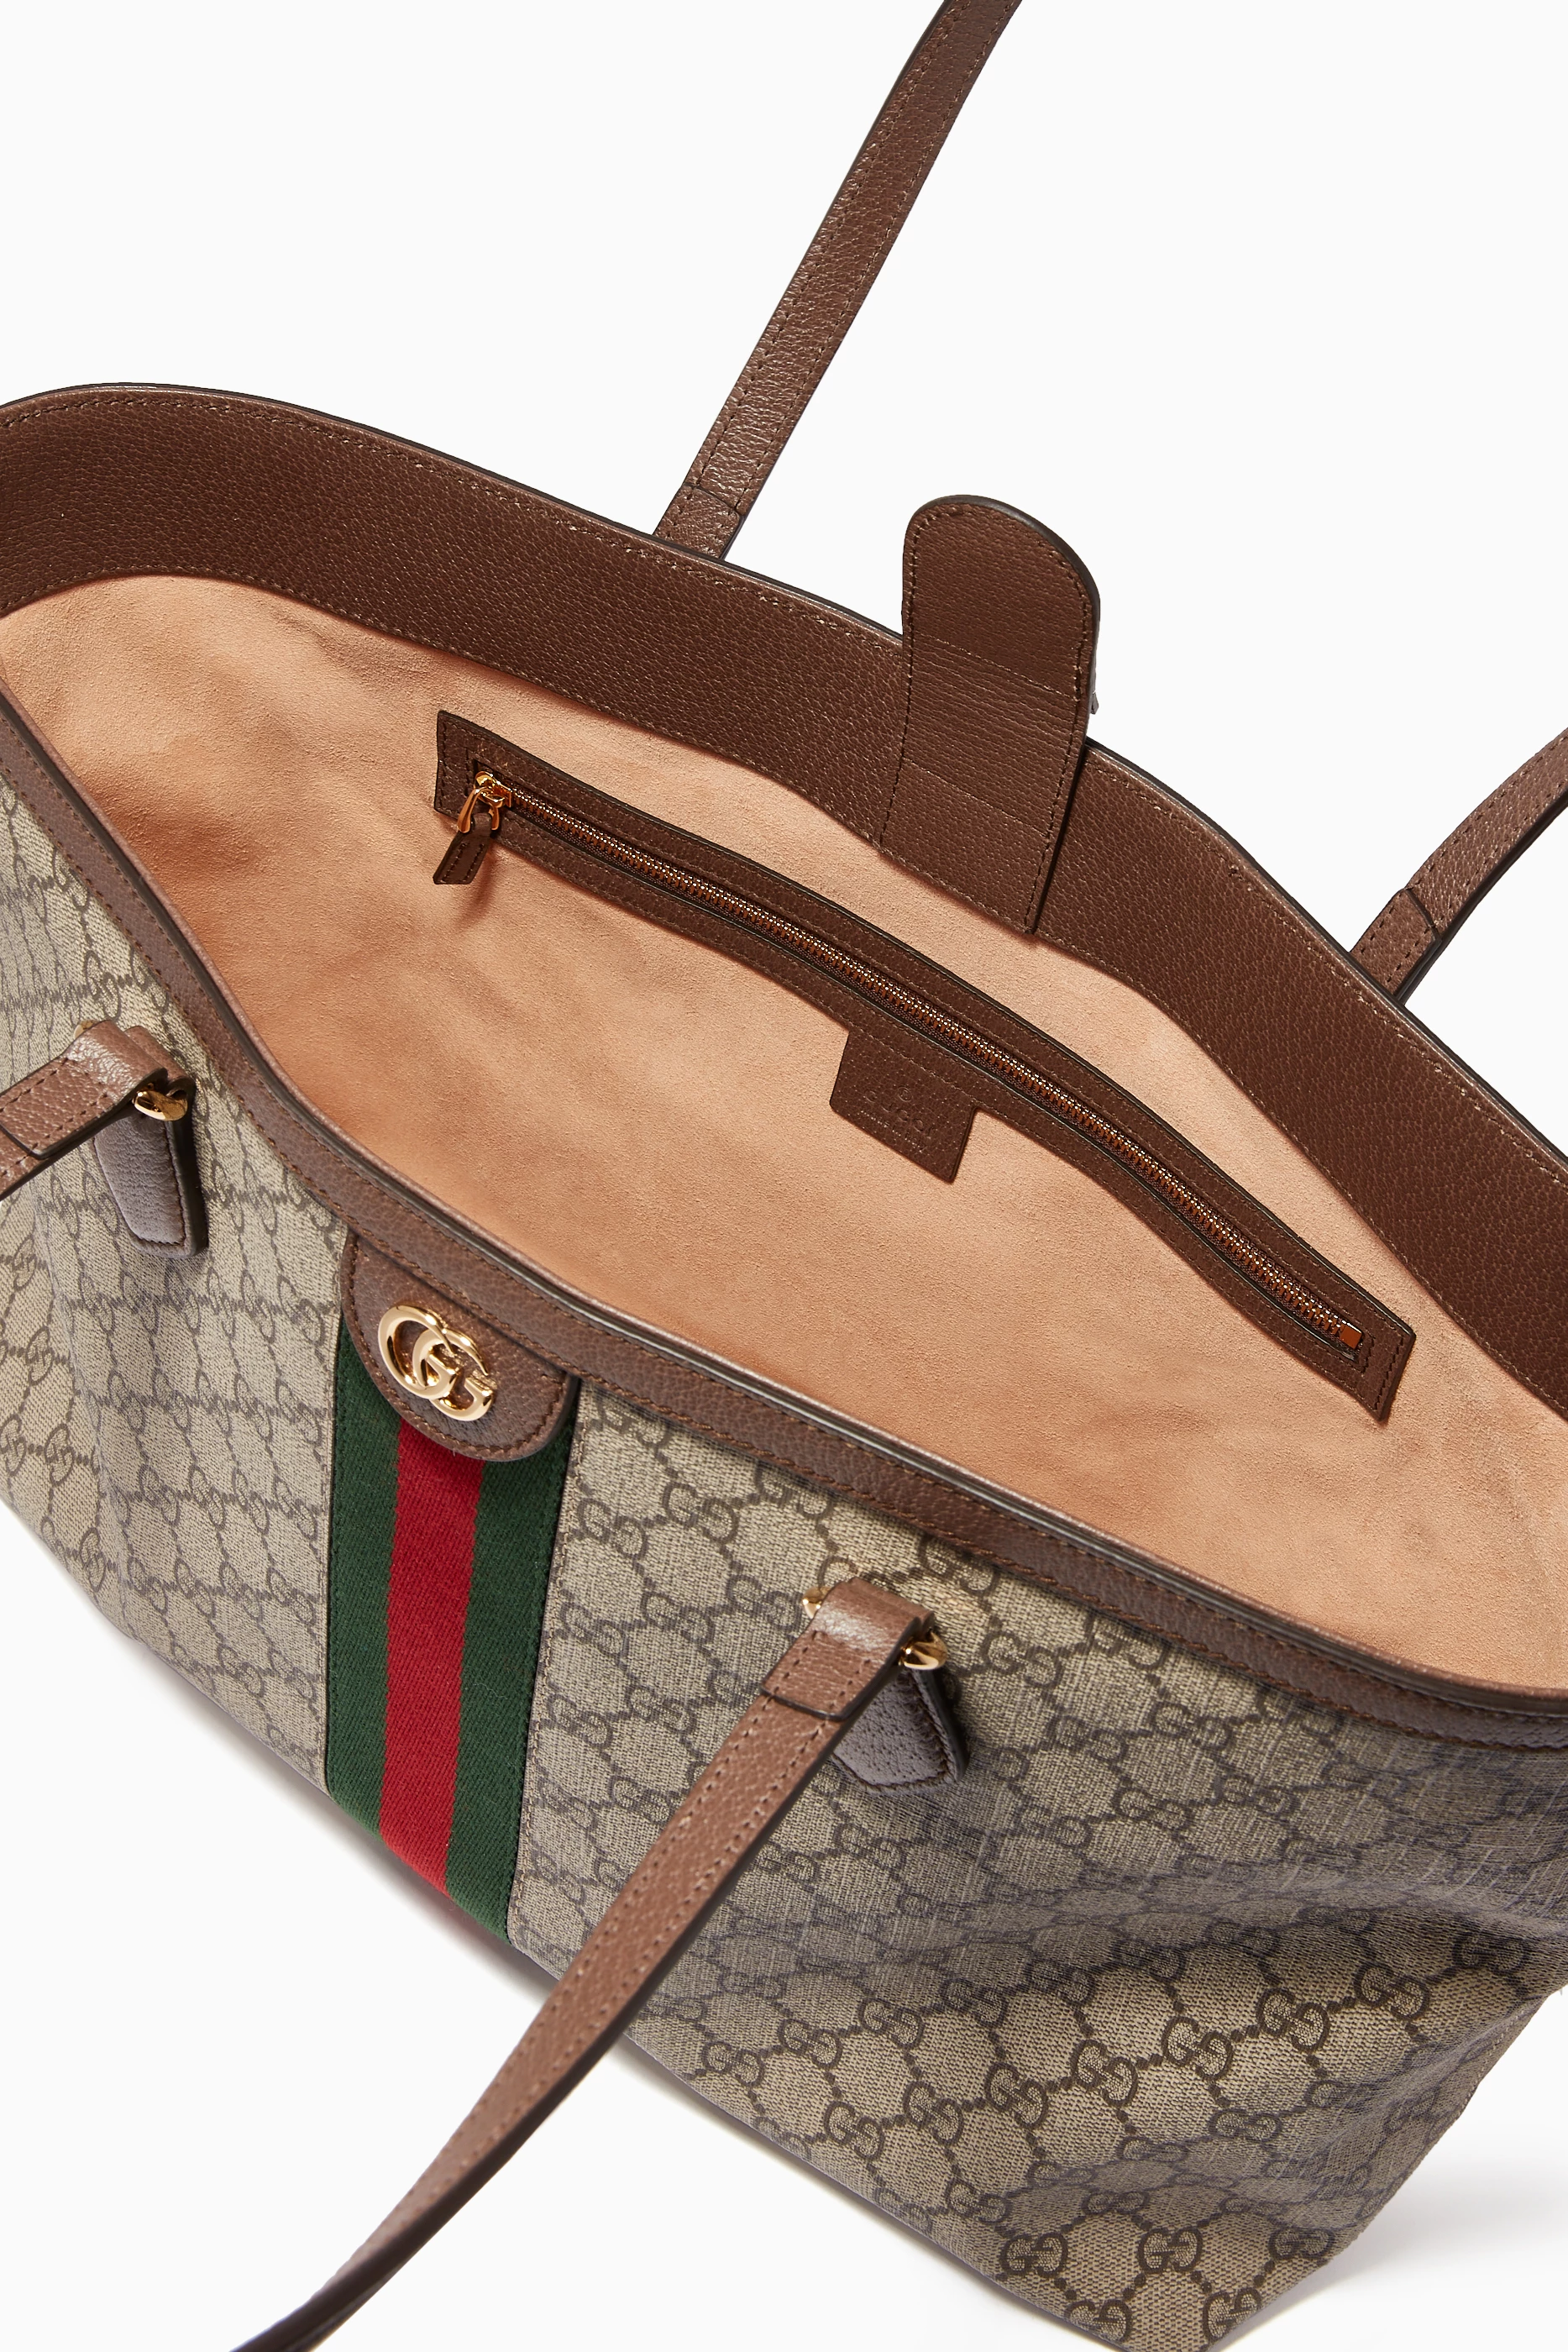 Gucci 115517 brown canvas and leather monogram vertical tote bag　From Japan